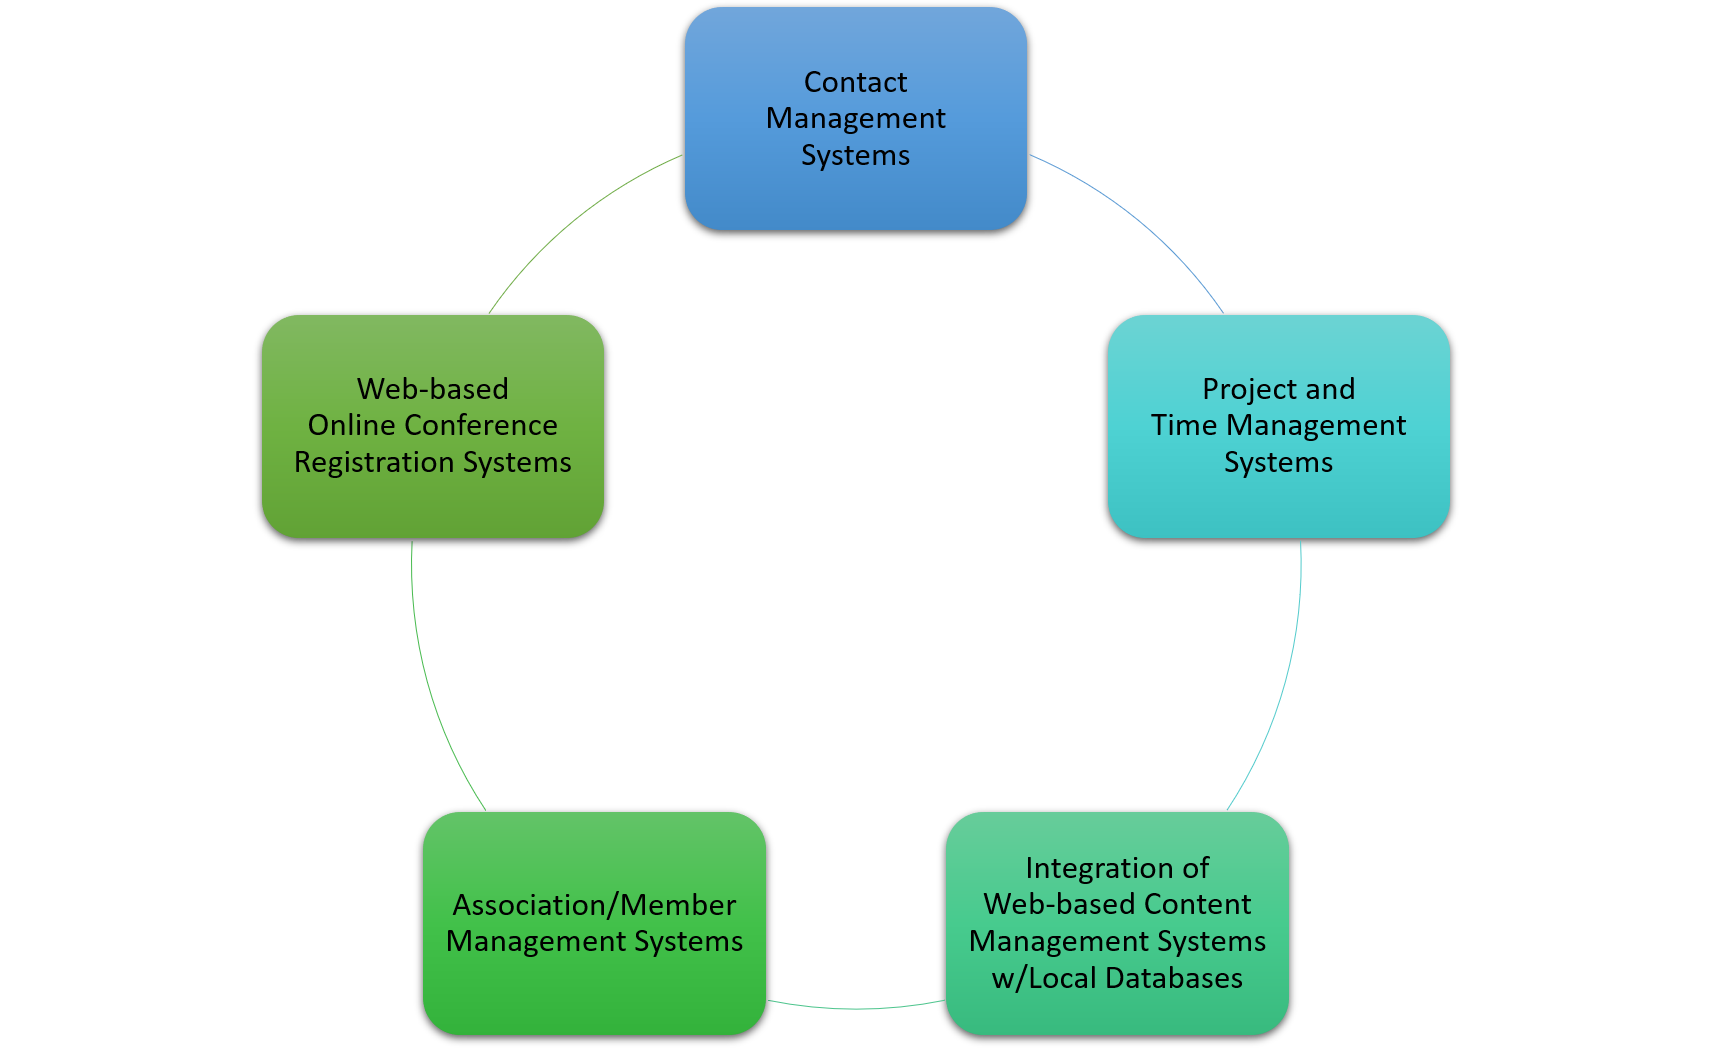 Database Projects include Contact Management Systems, Project and Time Management Systems, Integration of Web-based Content Management Systems w/Local Databases, Association/Member Management Systems and Web-based Online Conference Registration Systems